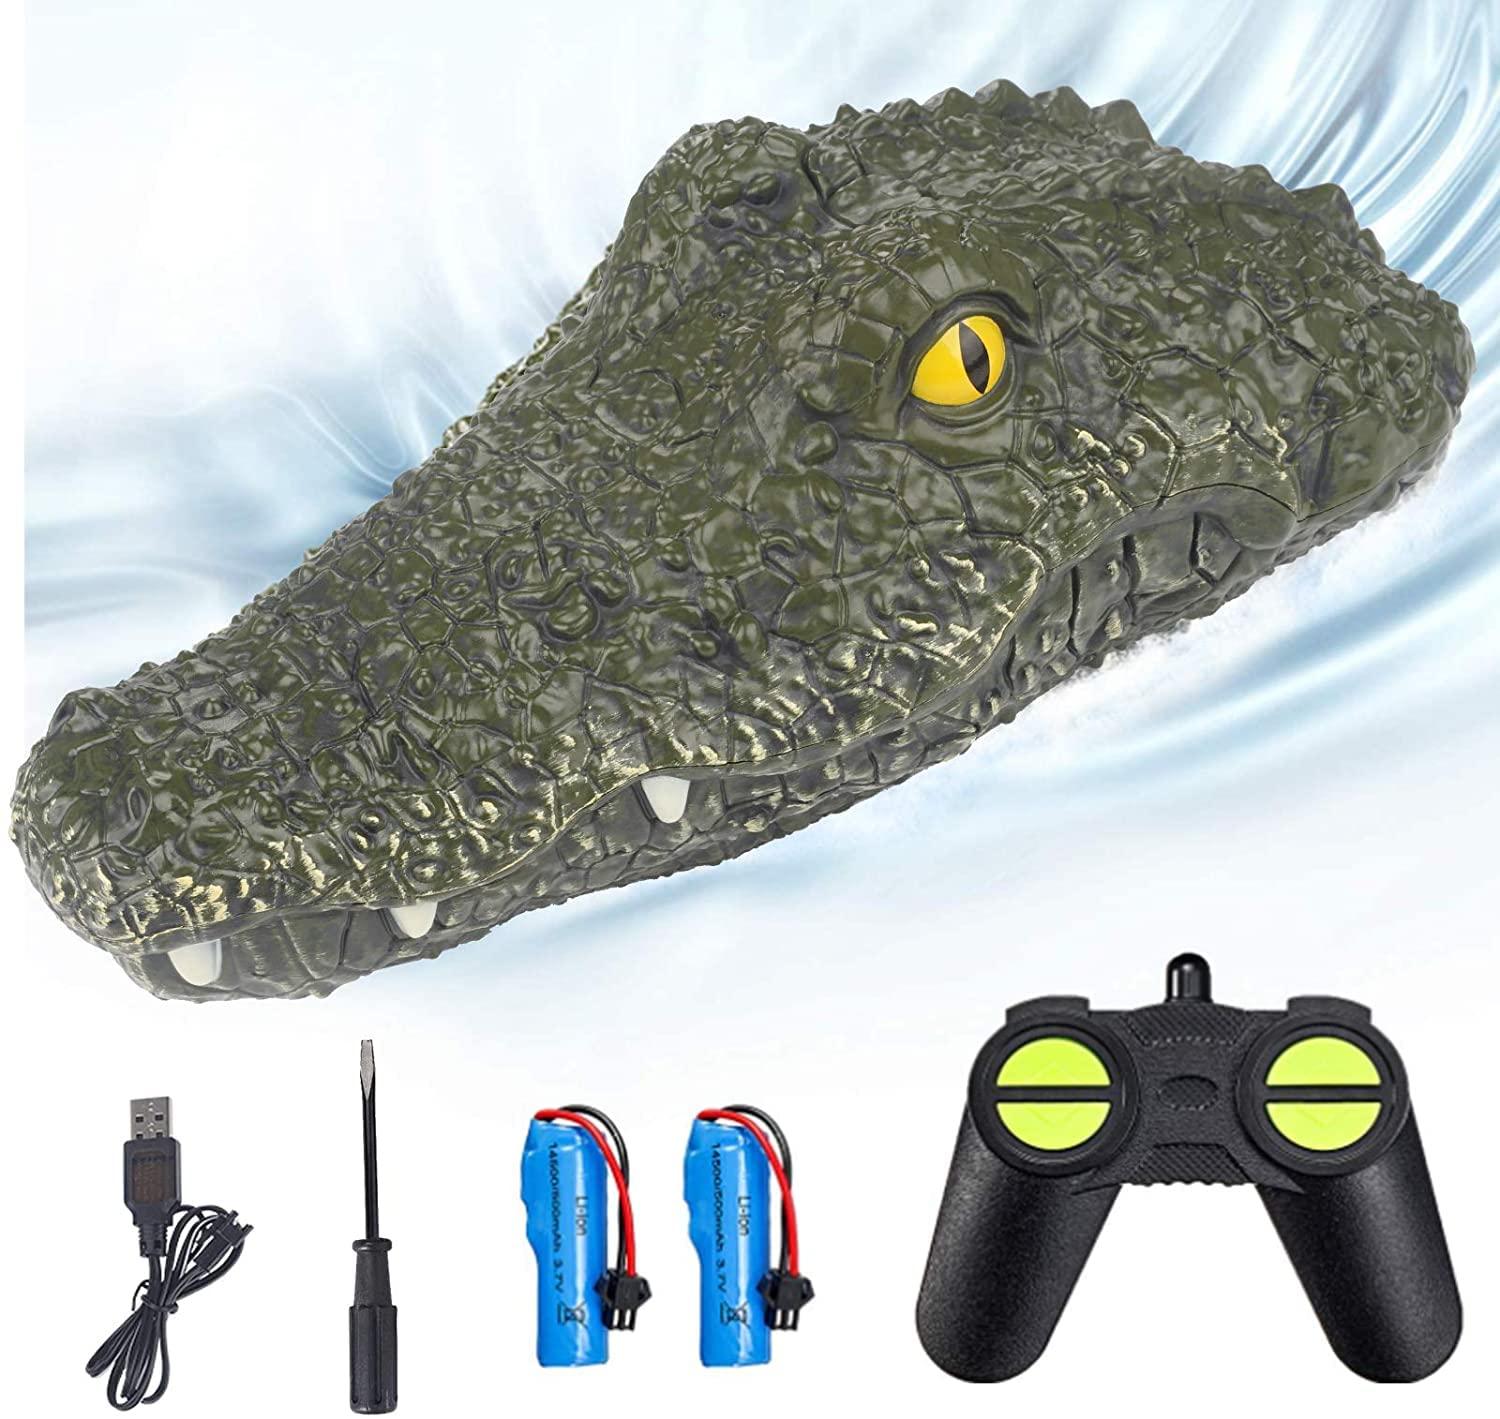 Remote Control Alligator Head: Product Usage Guidelines